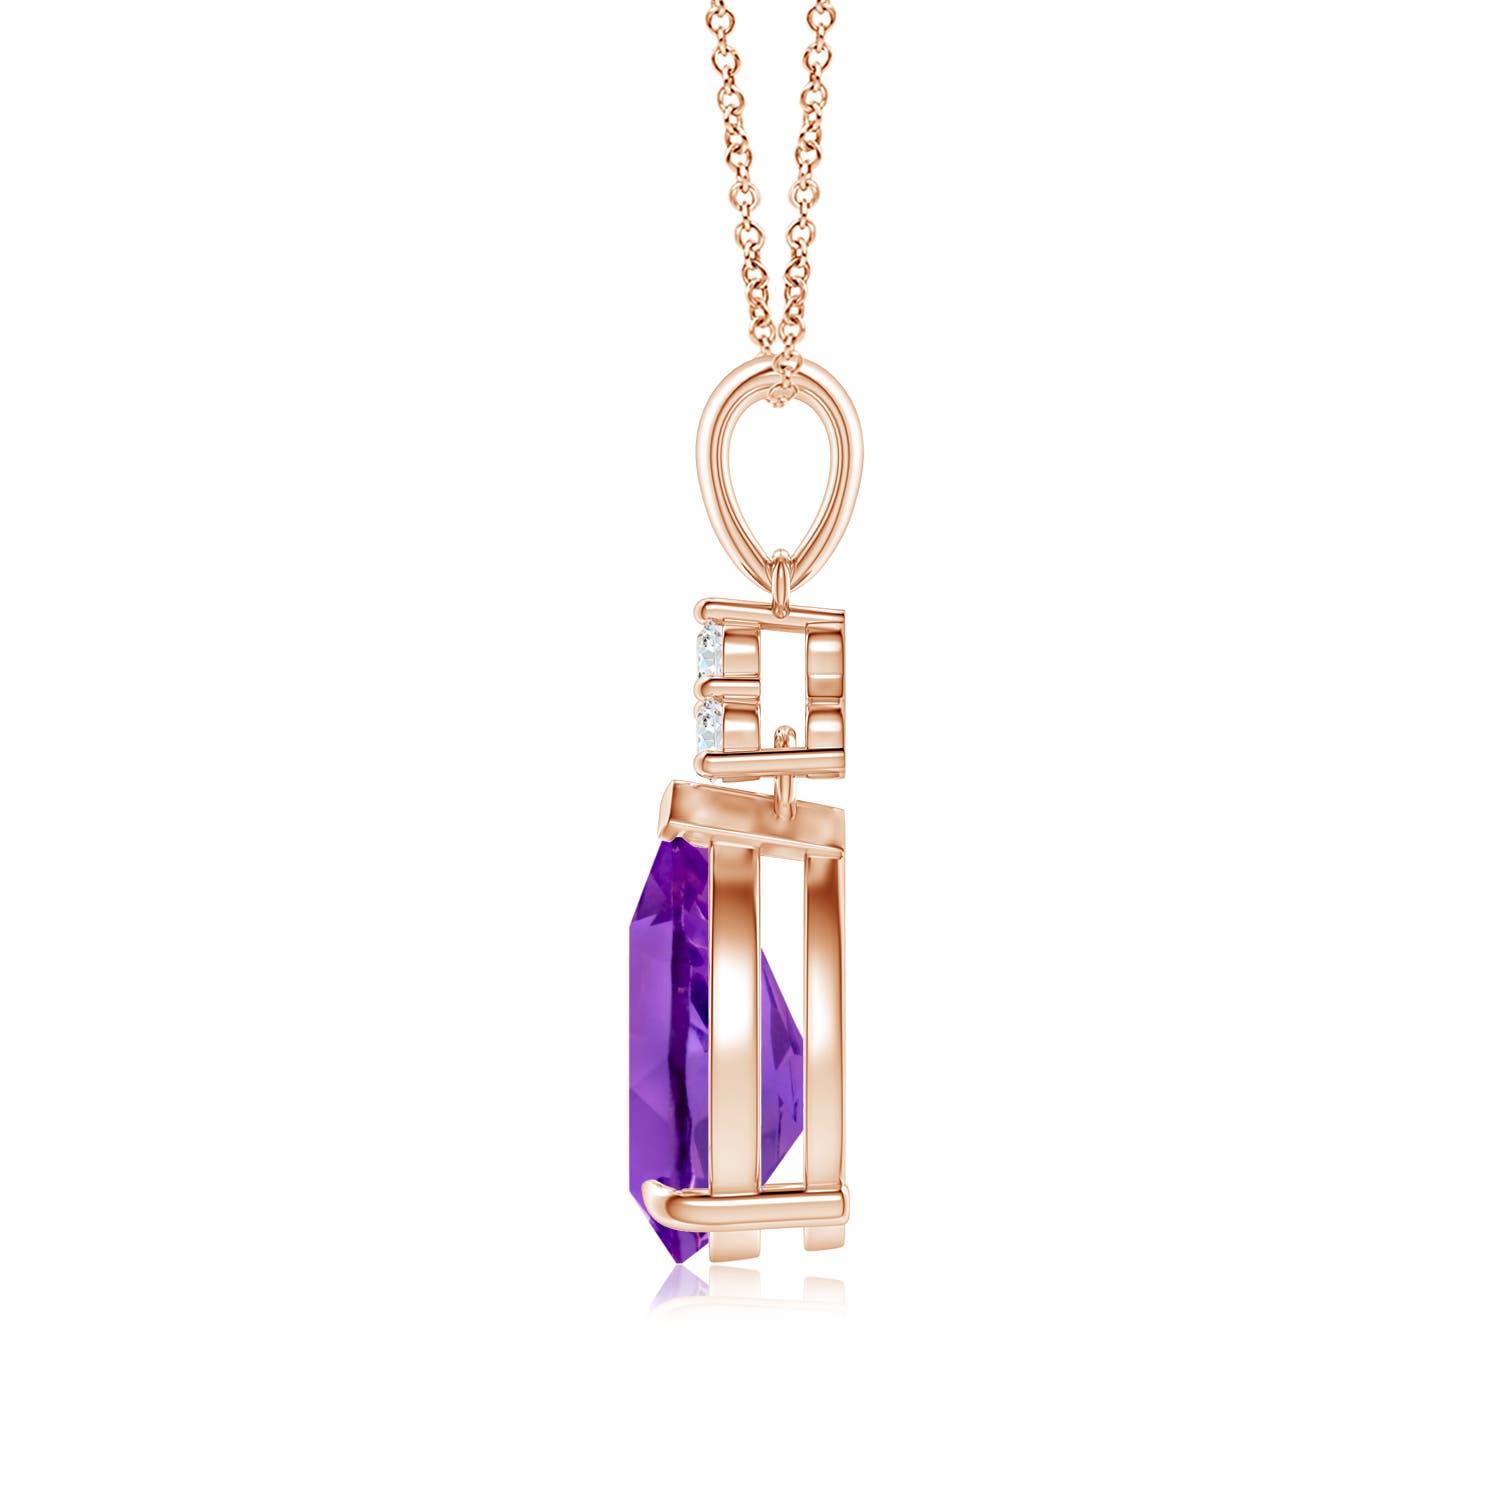 AAA - Amethyst / 1.69 CT / 14 KT Rose Gold